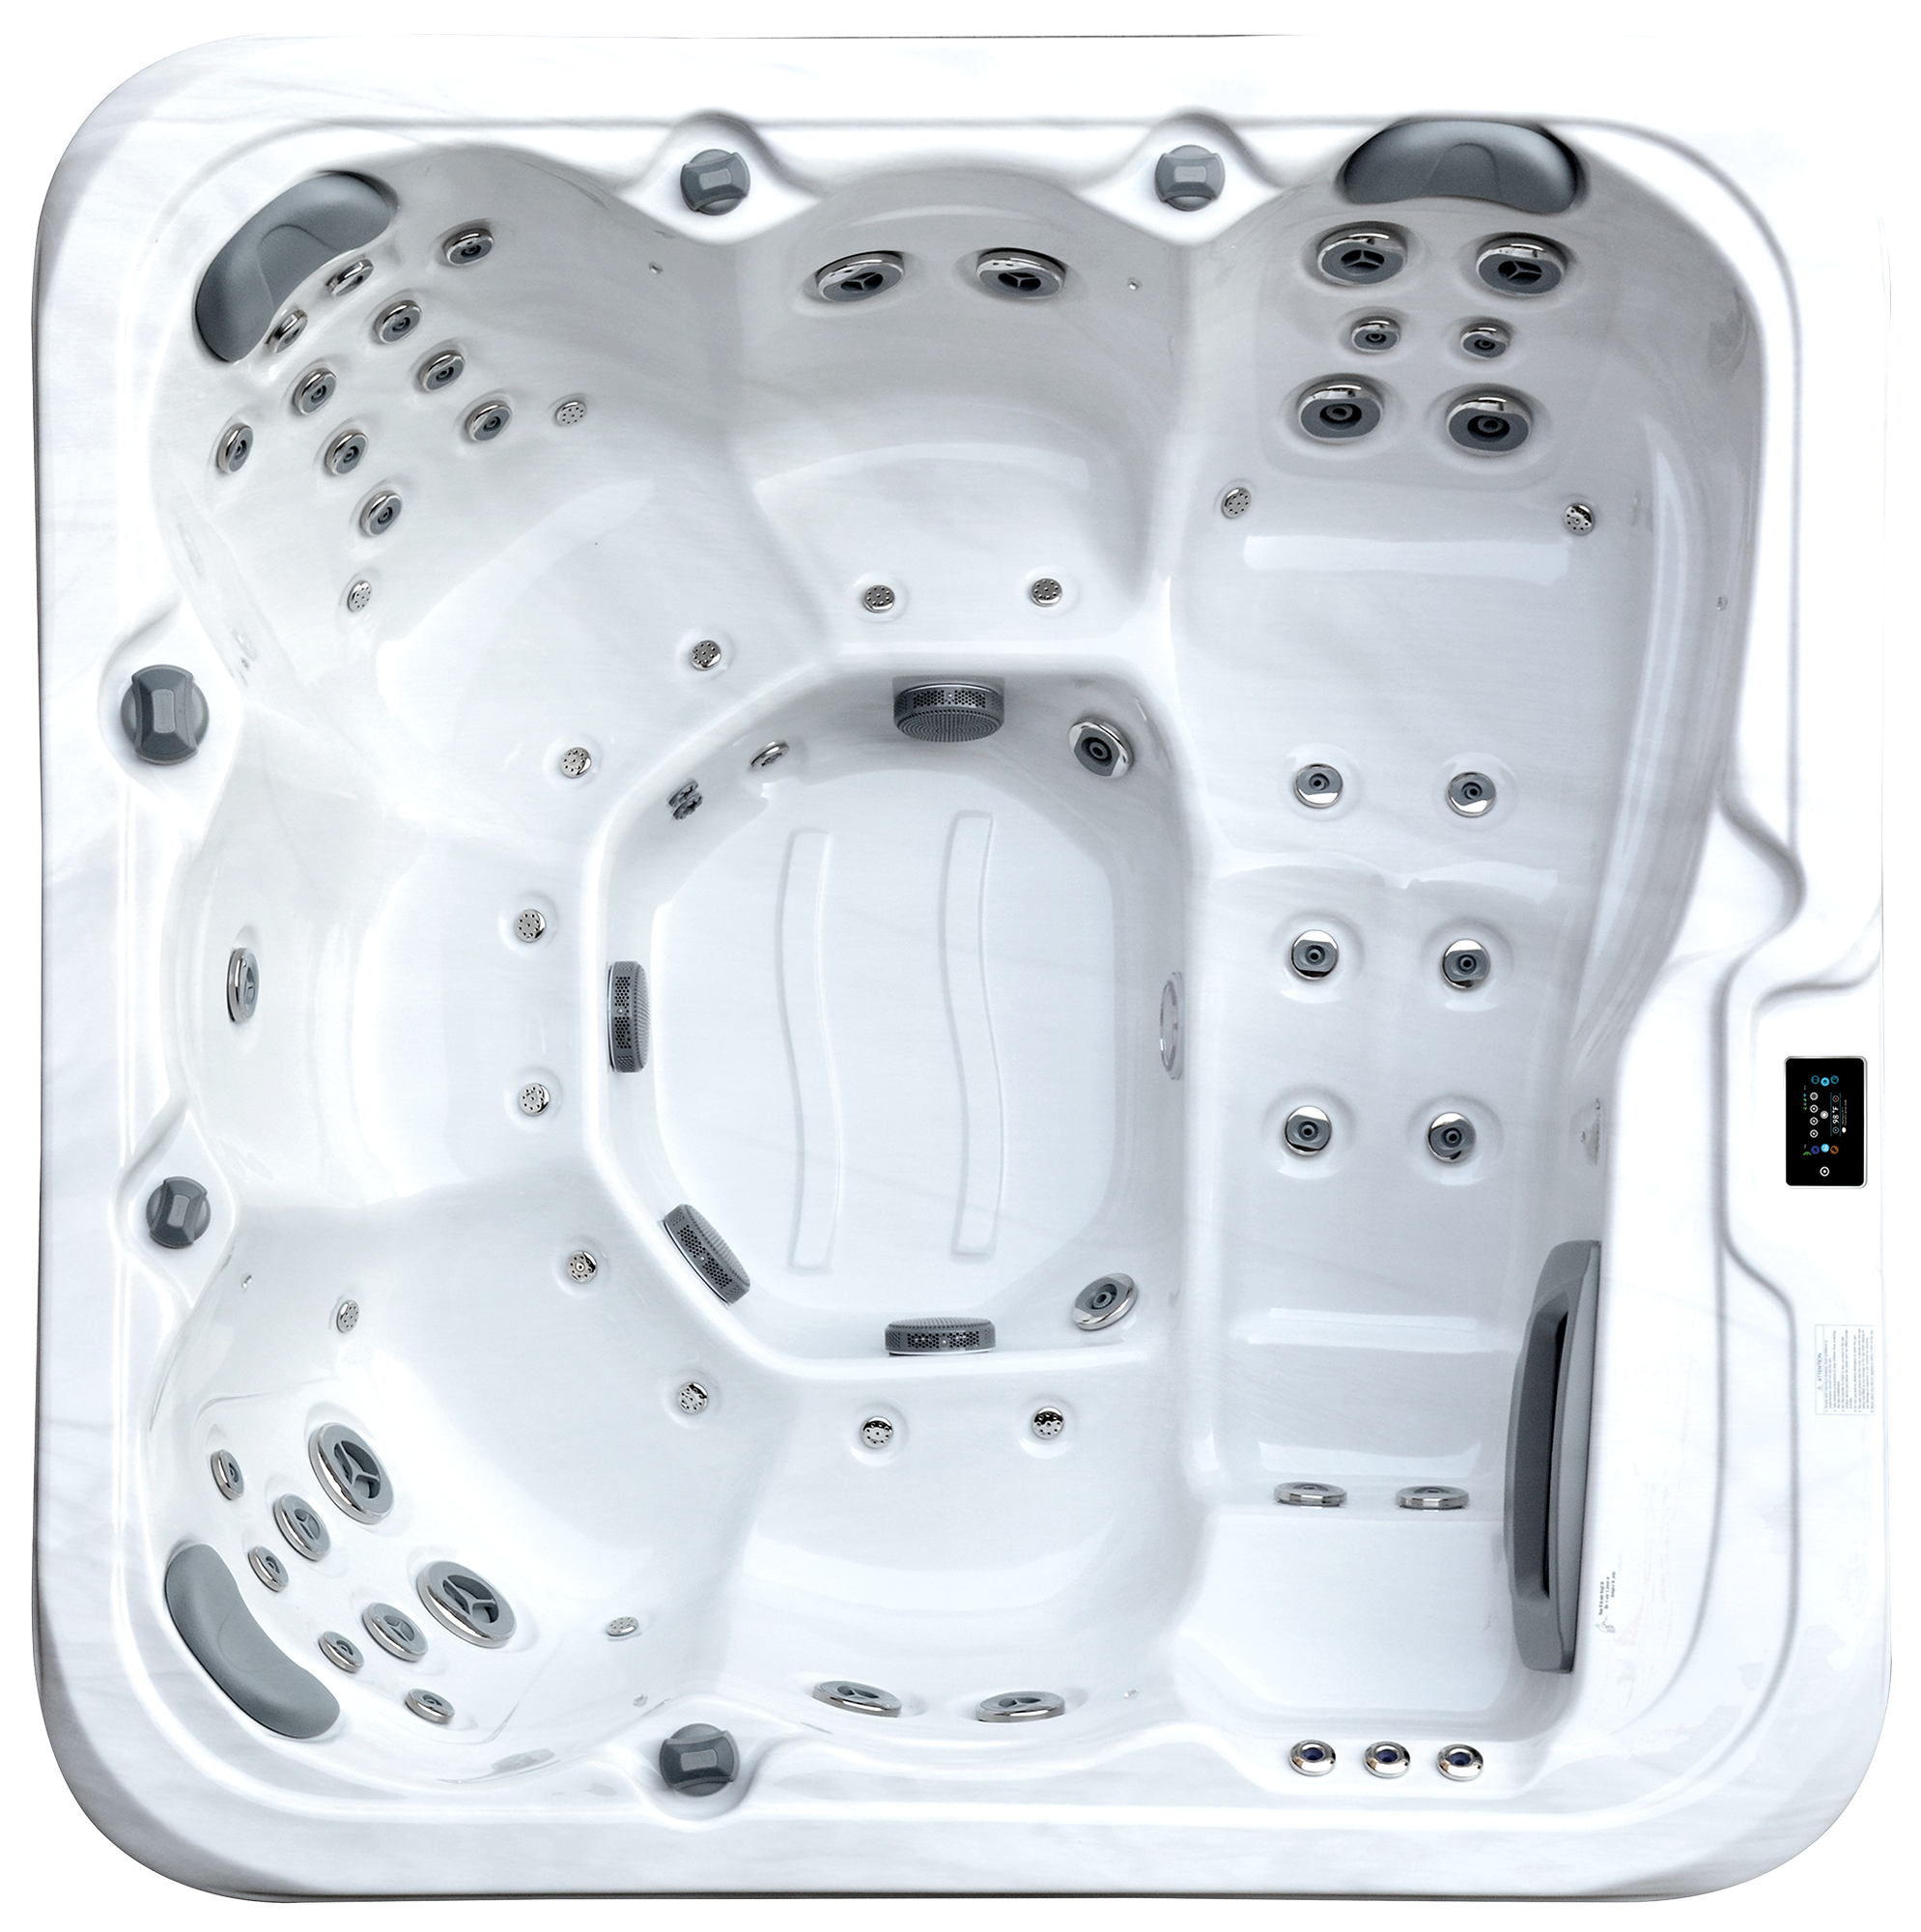 oasis rx-363 hot tub available at hot tub liverpool 